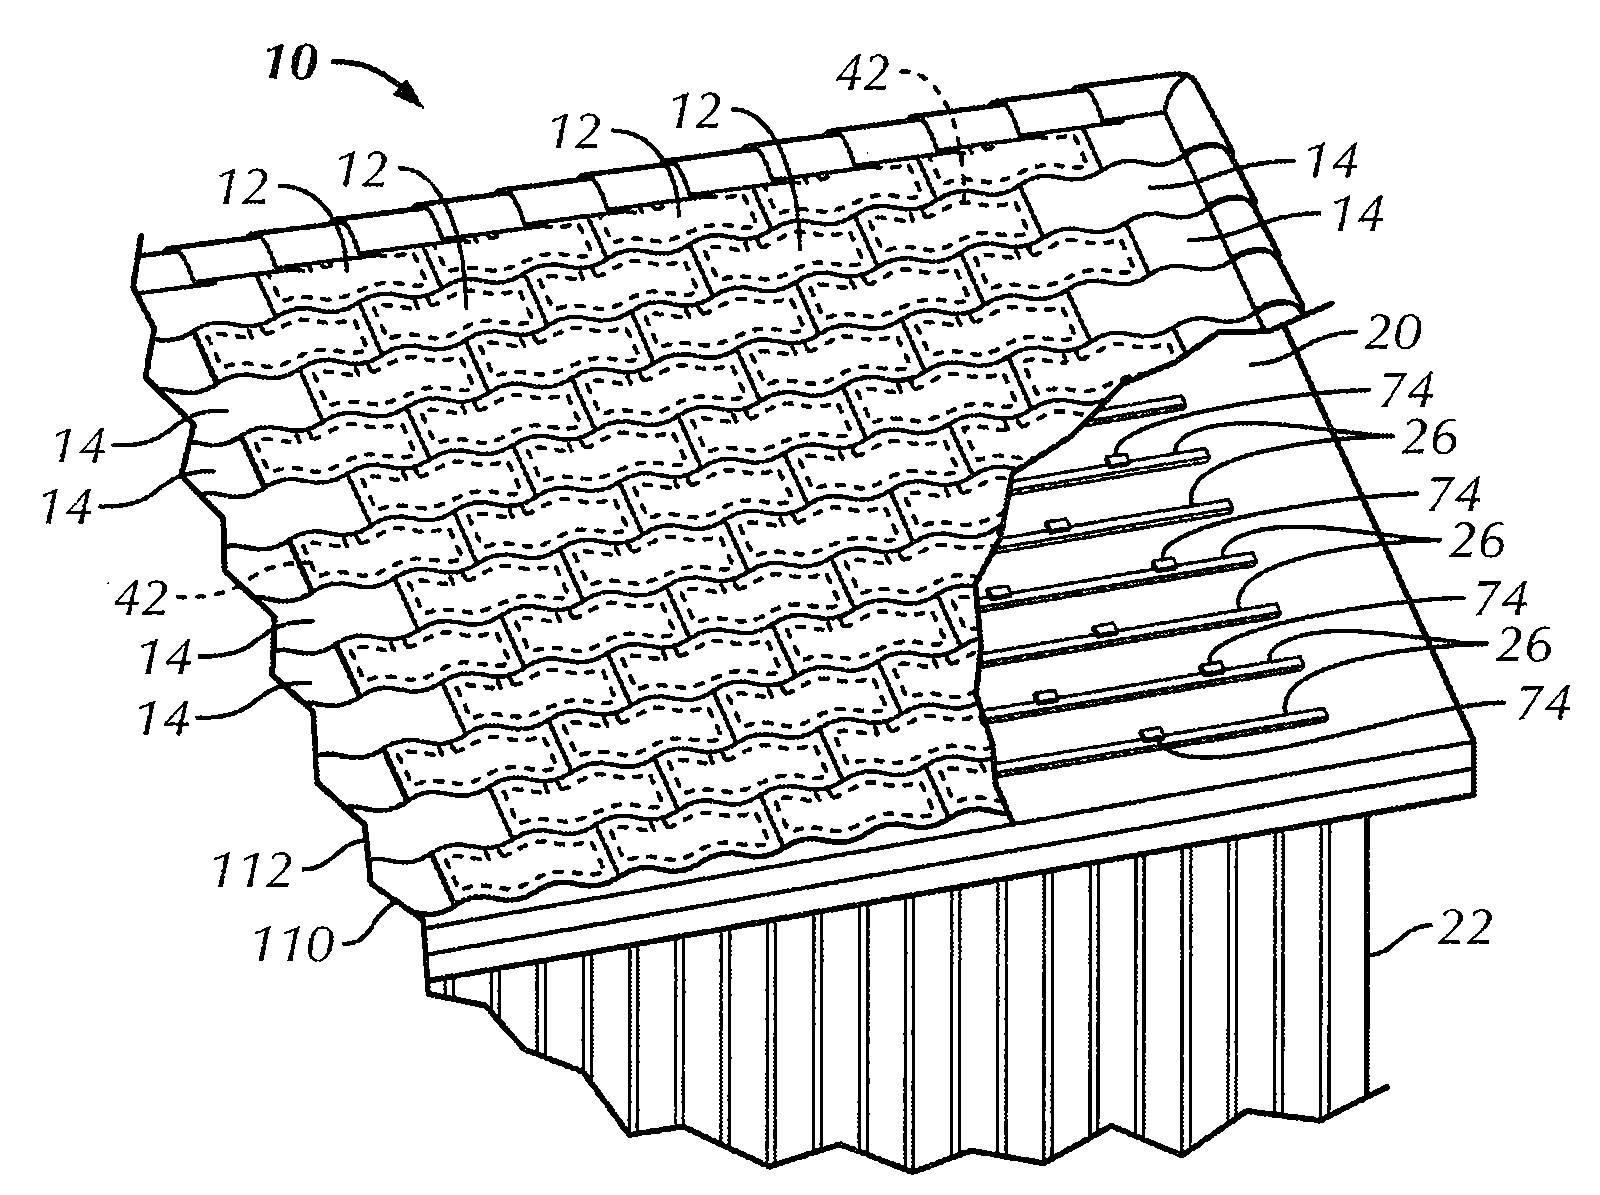 Integrated solar roofing tile connection system